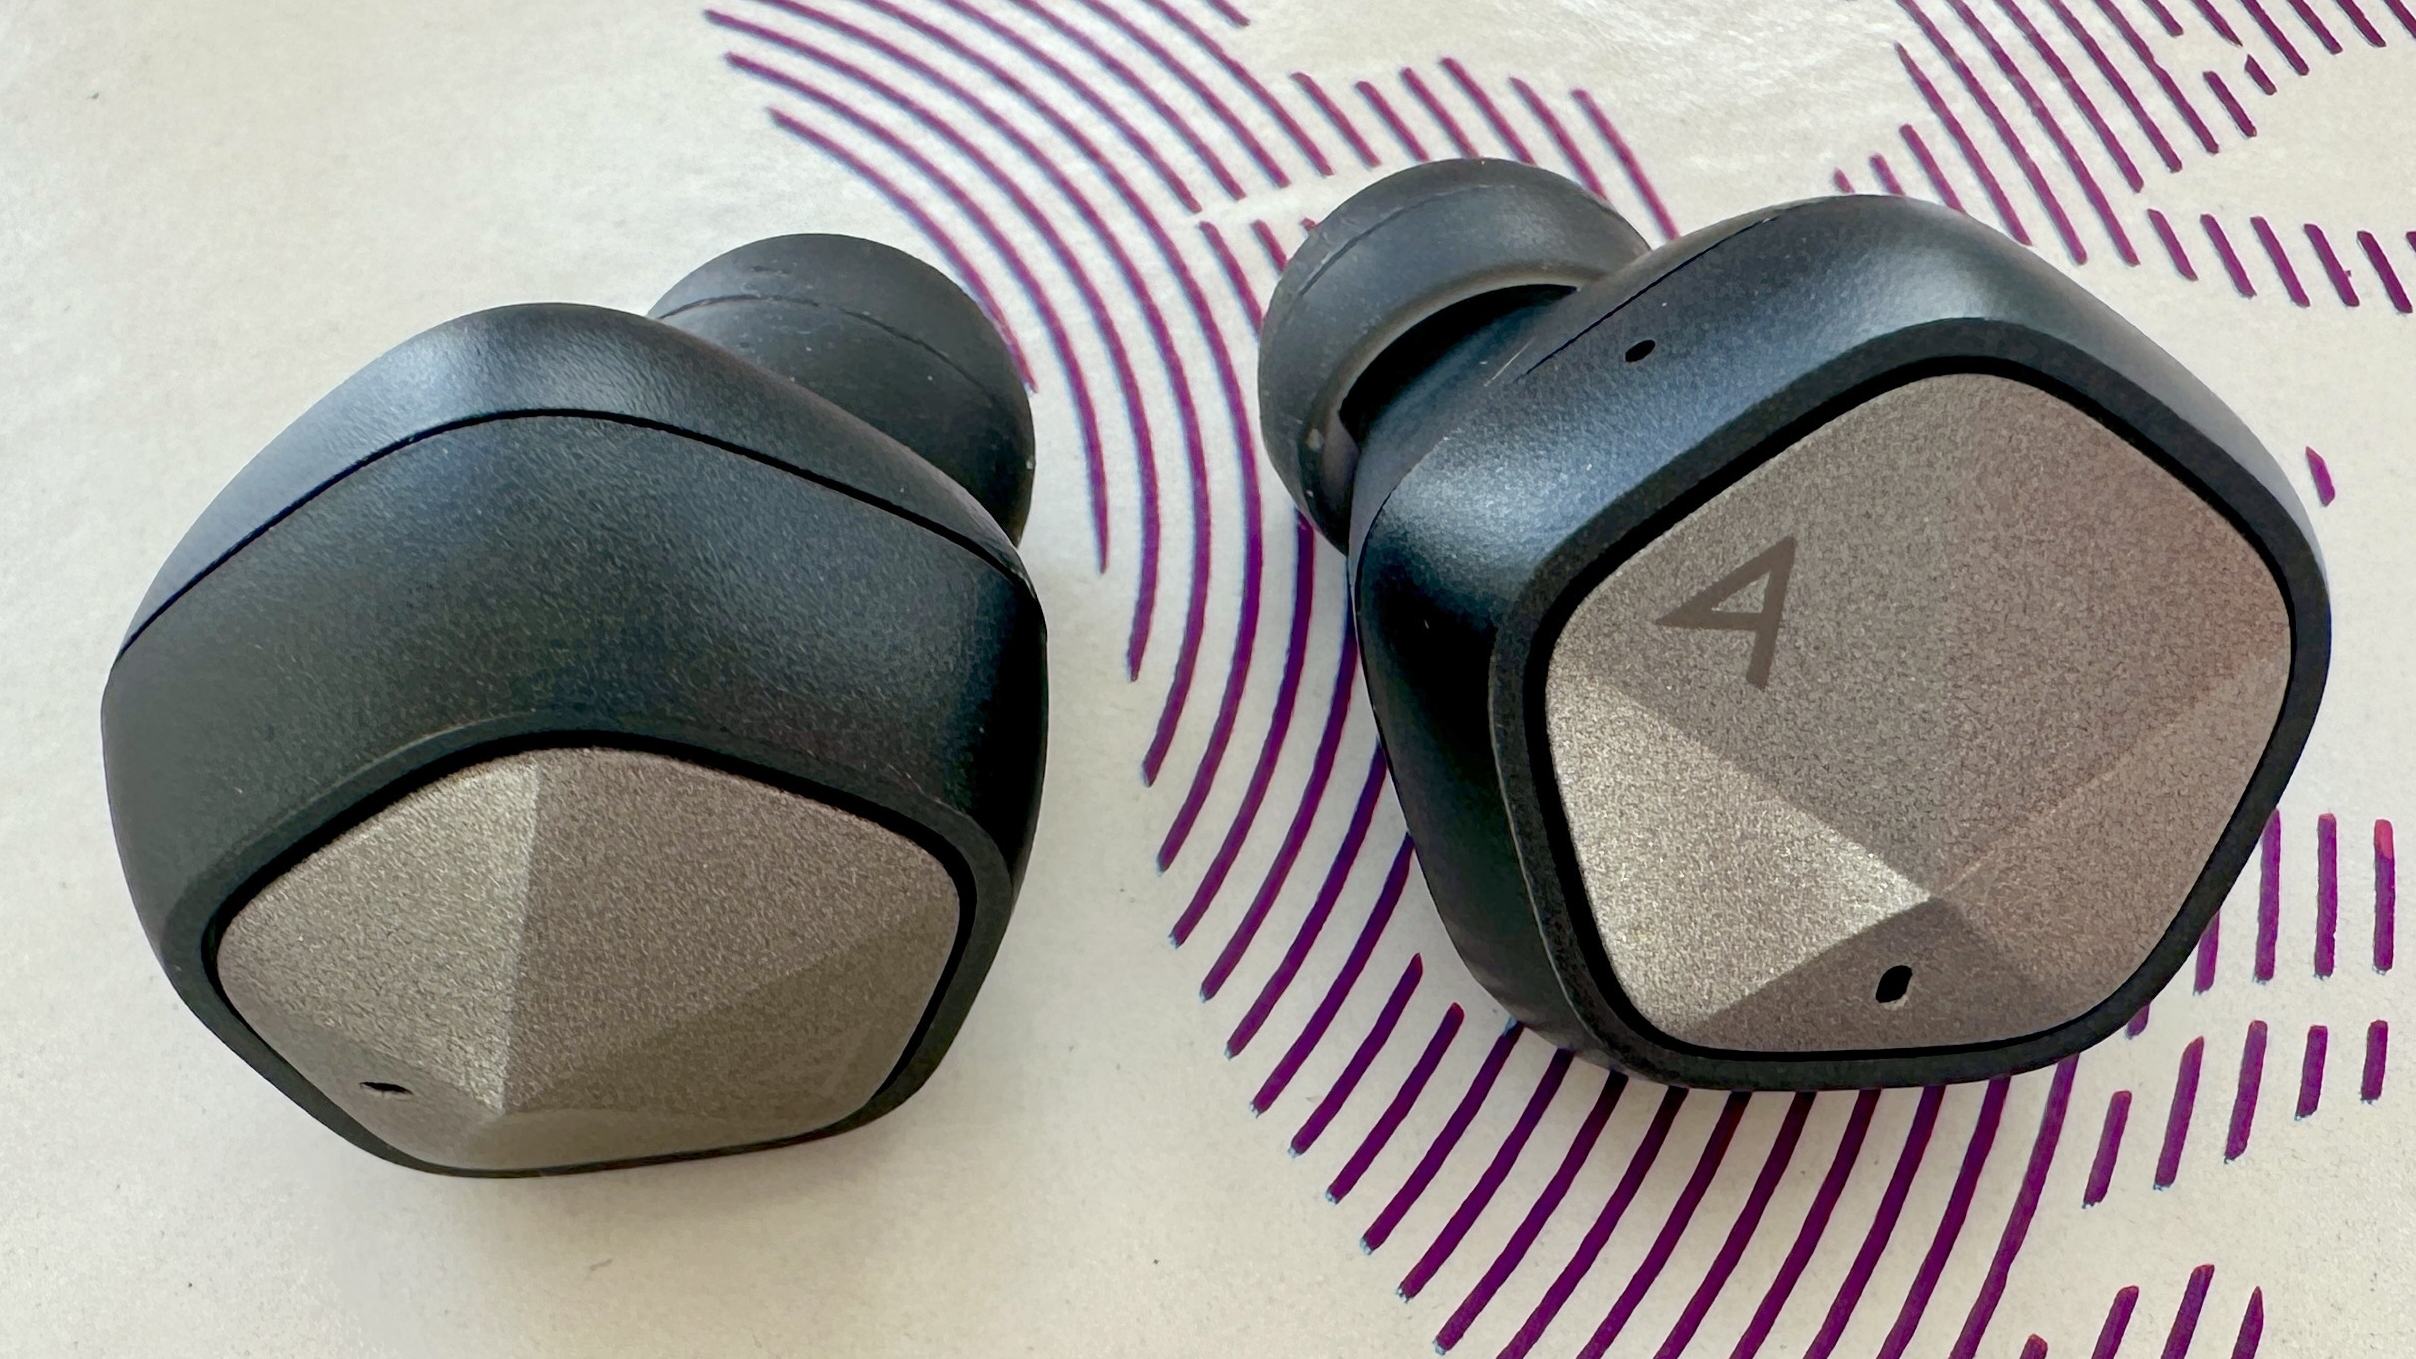 android, astell & kern uw100 mkii review: insightful sound, cumbersome design